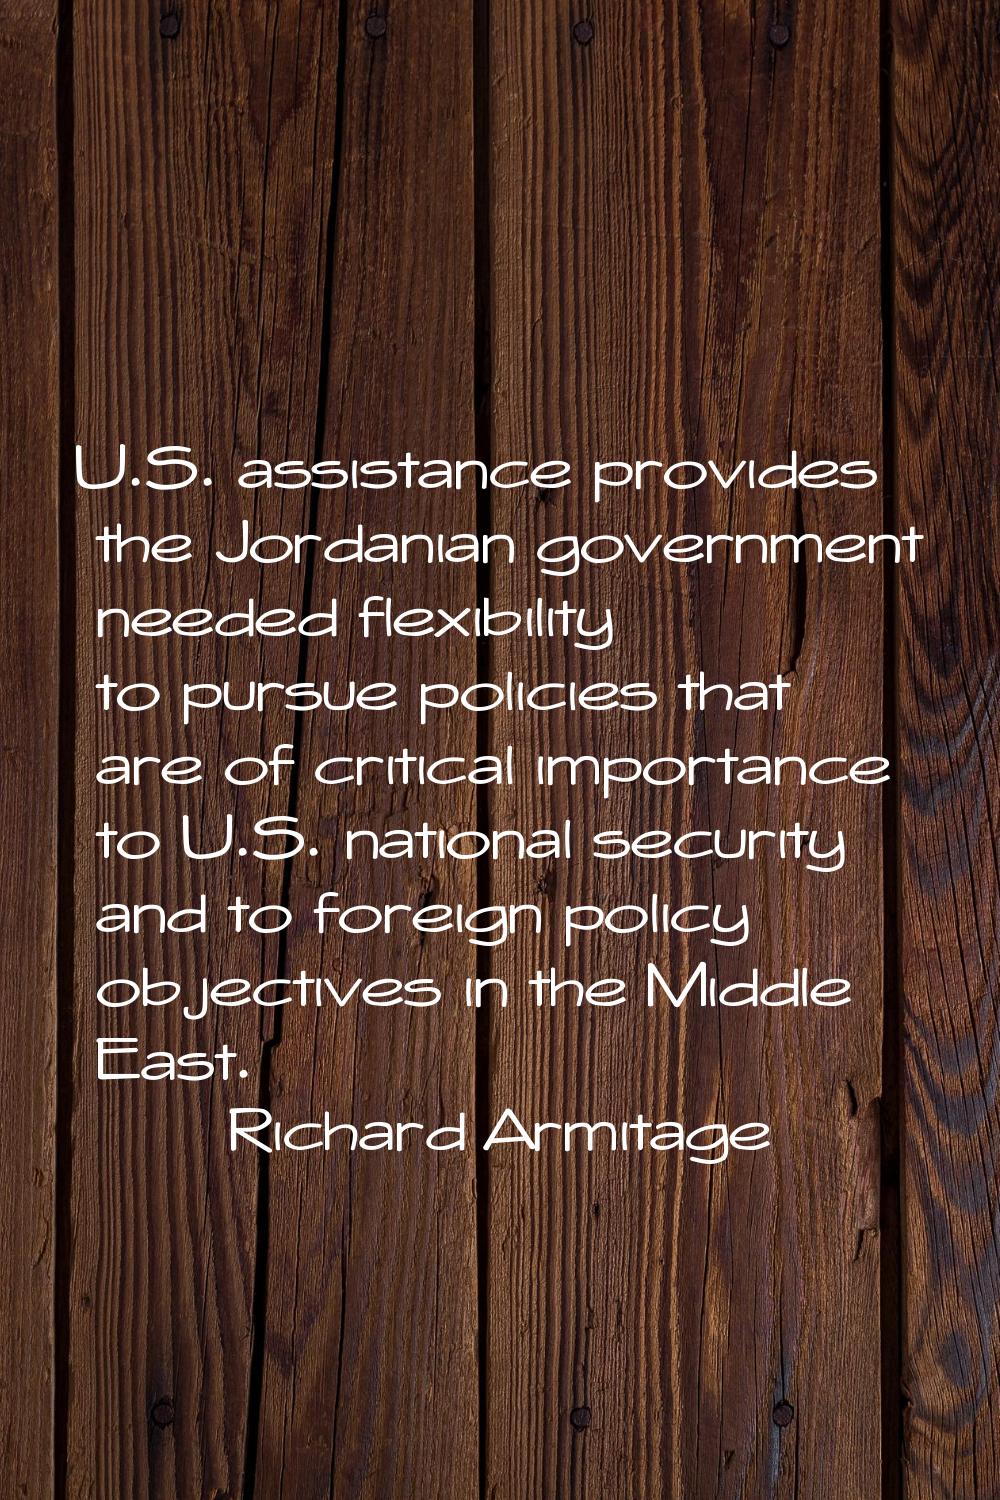 U.S. assistance provides the Jordanian government needed flexibility to pursue policies that are of